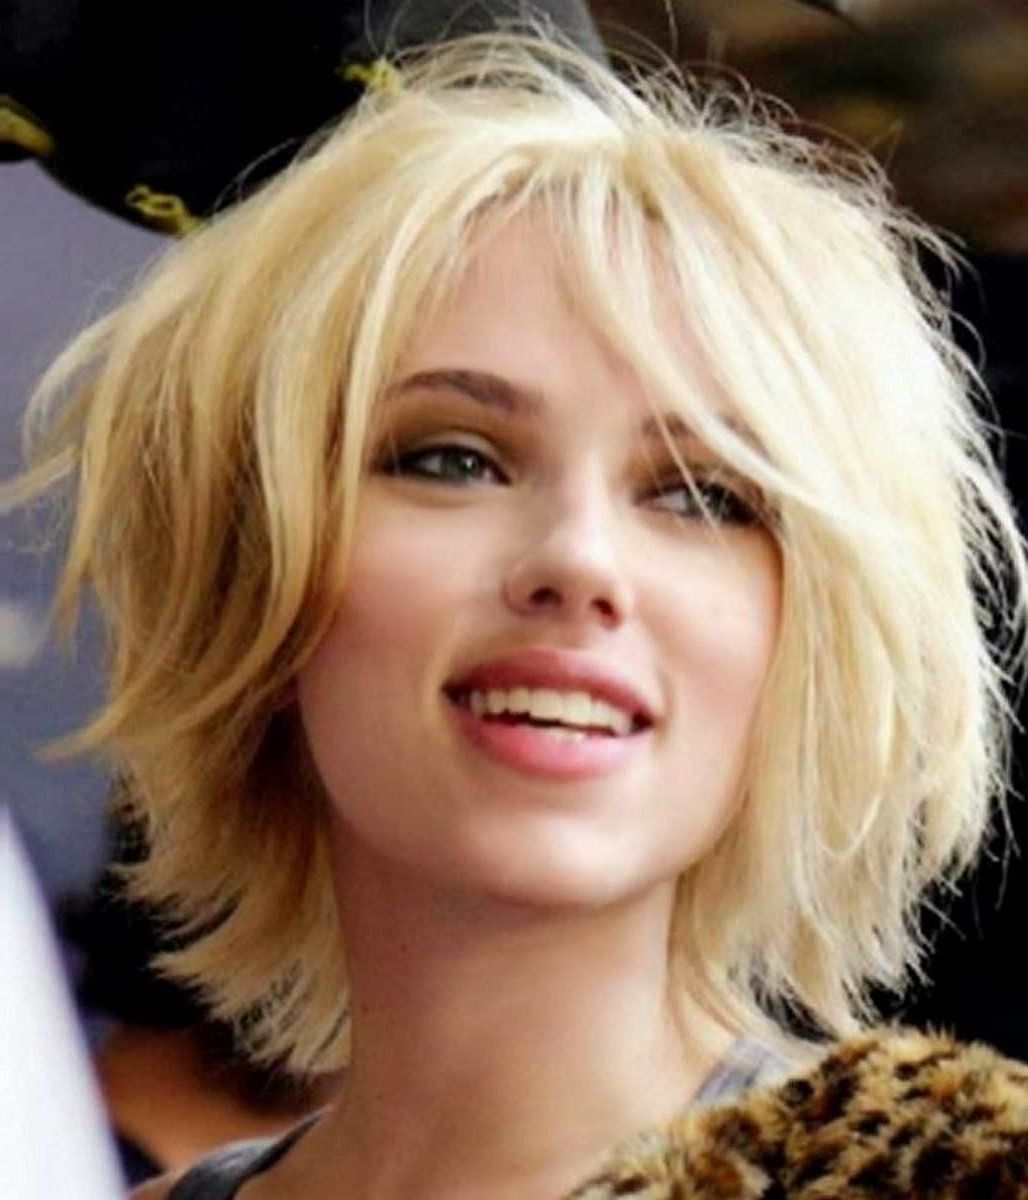 Widely Used Shaggy Crop Hairstyles With Short Shaggy Hairstyles For Thick Hair: Popular Short Shaggy (View 2 of 15)